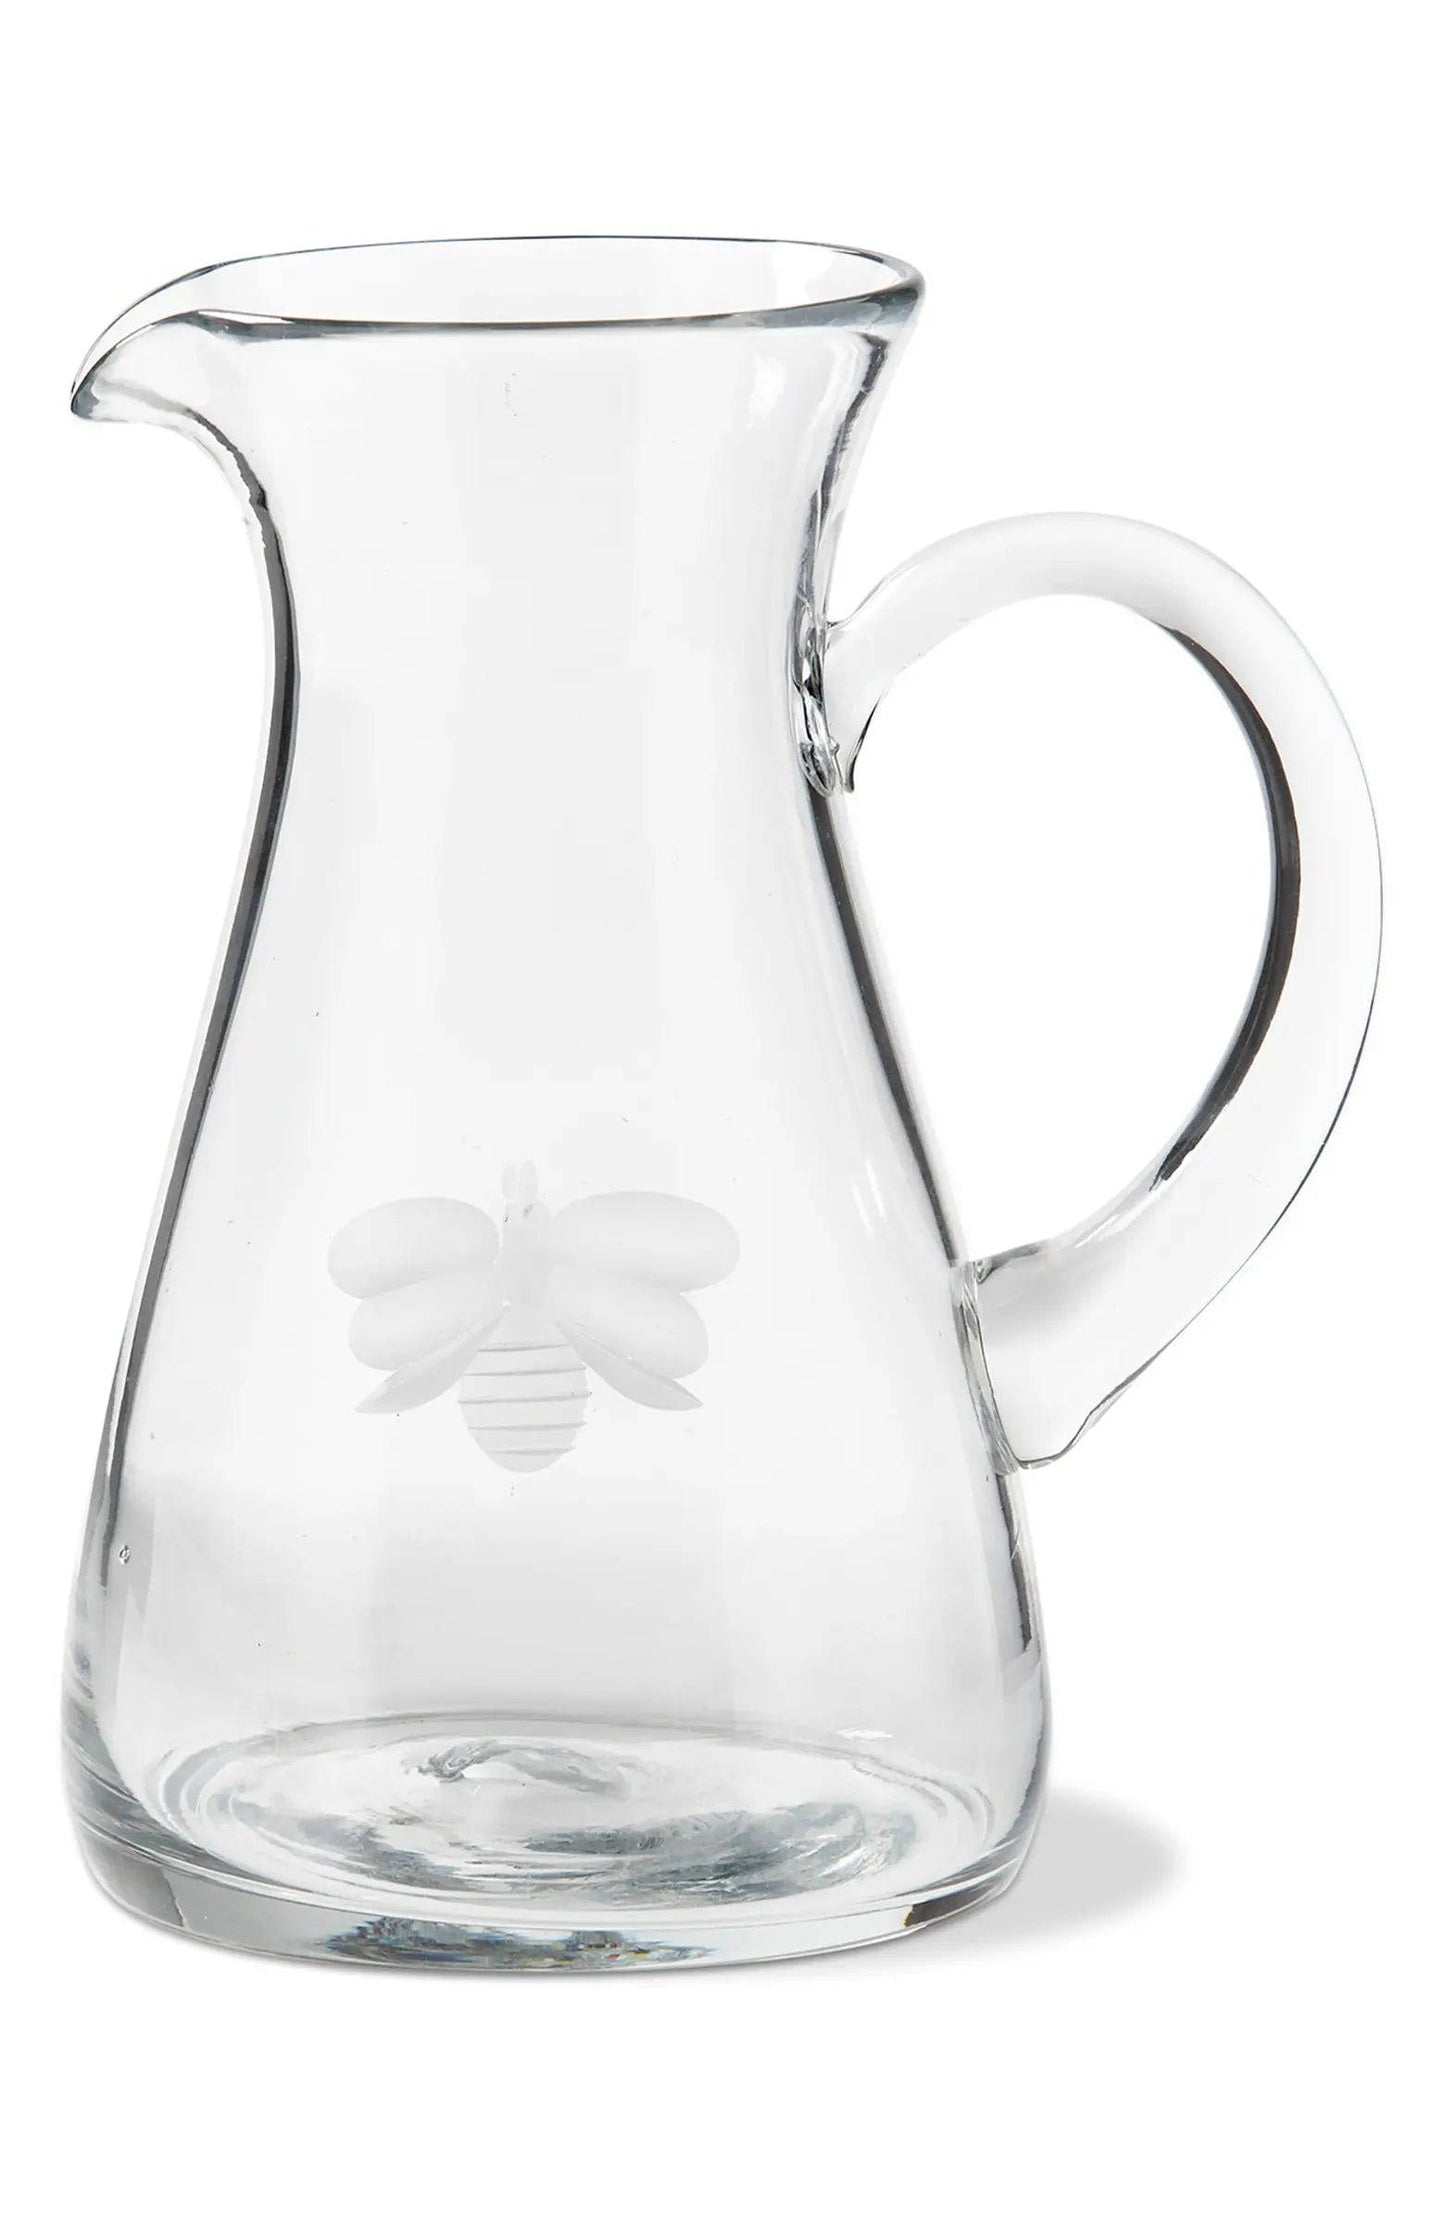 Etched Bee Pitcher - Findlay Rowe Designs